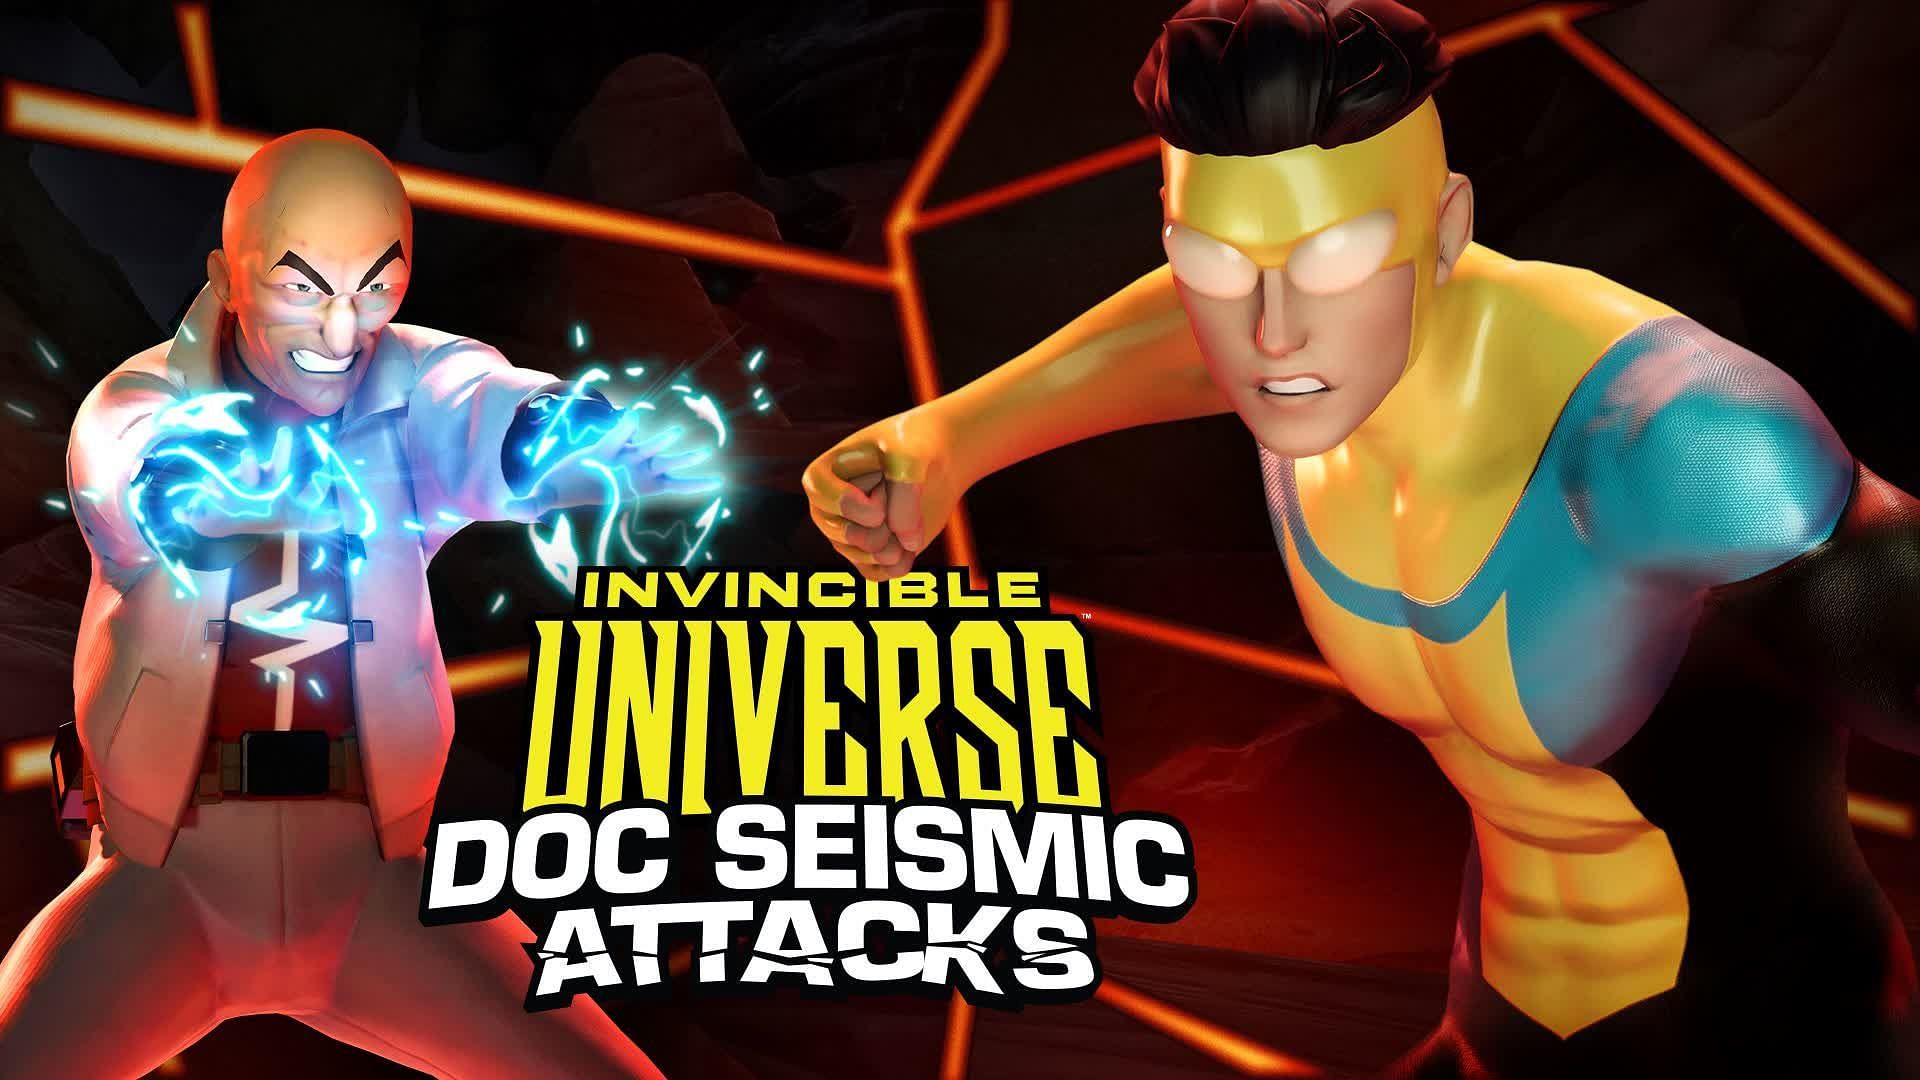 Fortnite Invincible Universe Doc Seismic Attacks: UEFN map code, how to play, and more